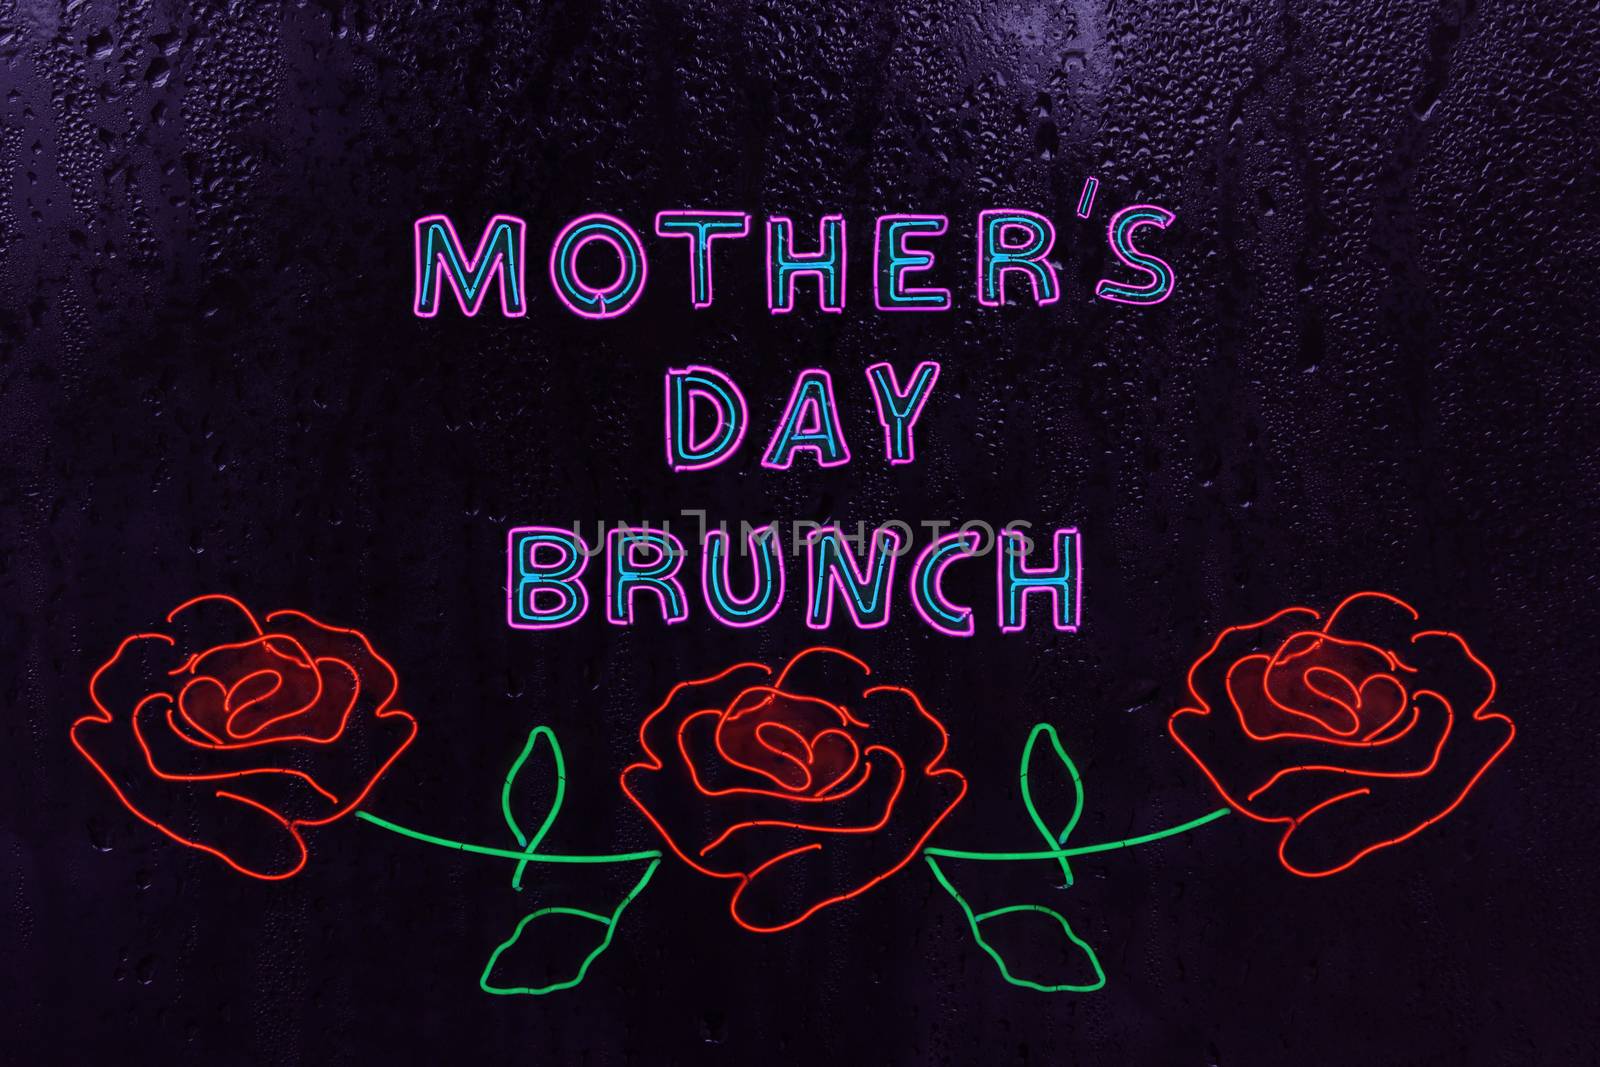 Neon Mother's Day Brunch Sign in Rainy Window